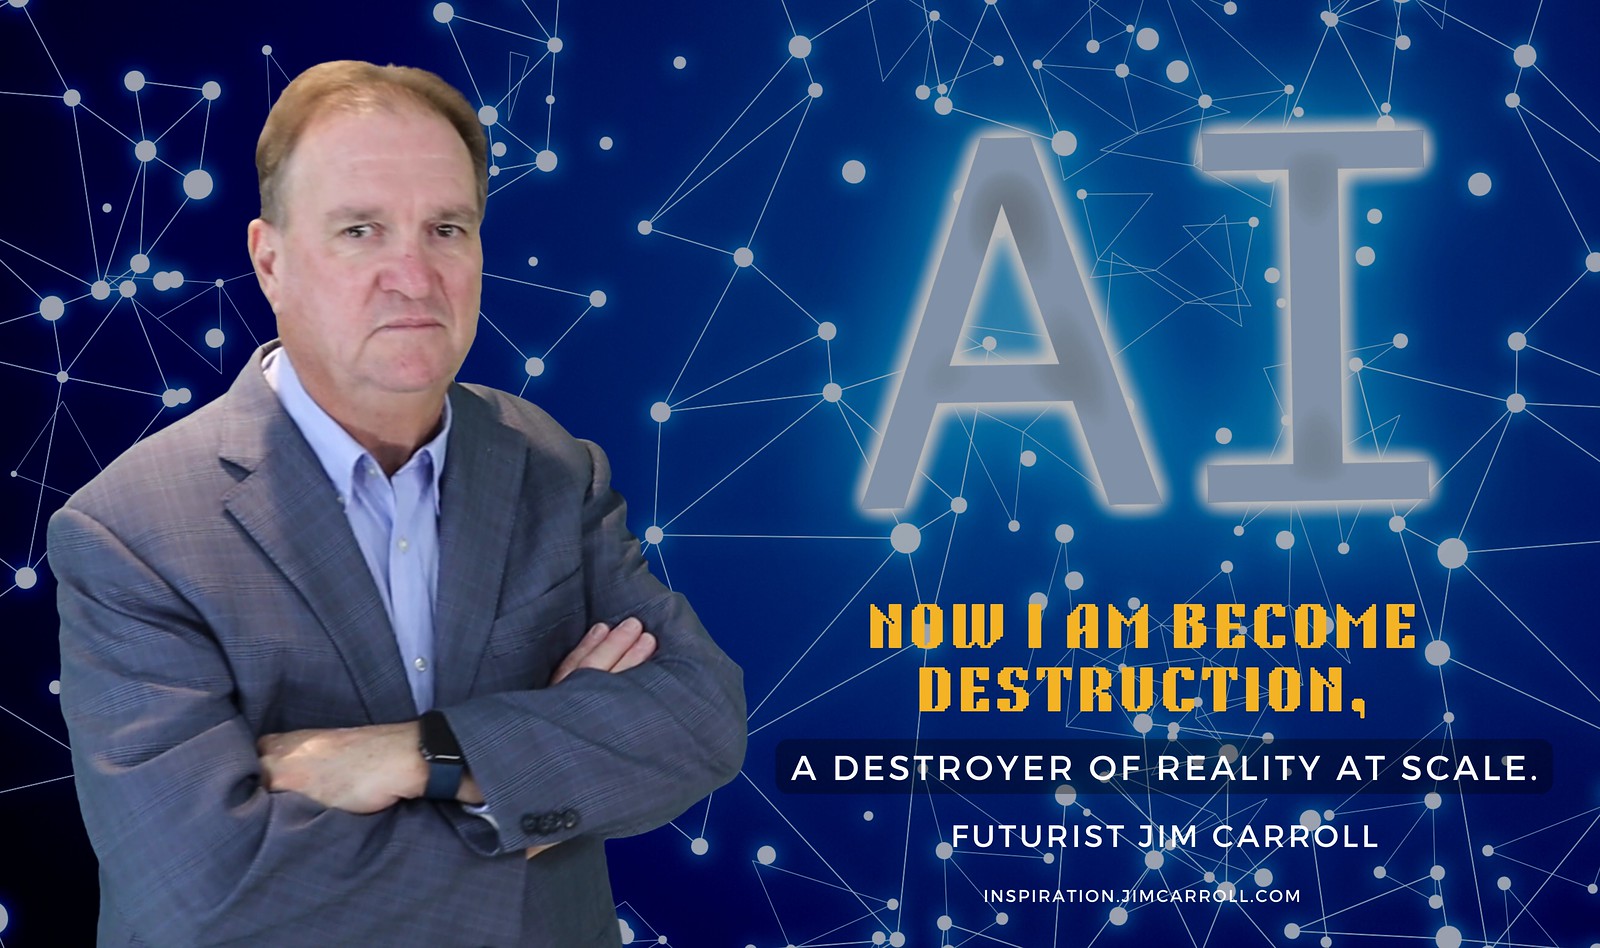 Blue "AI. Now I am become destruction. A destroyer of reality at scale." - Futurist Jim Carroll